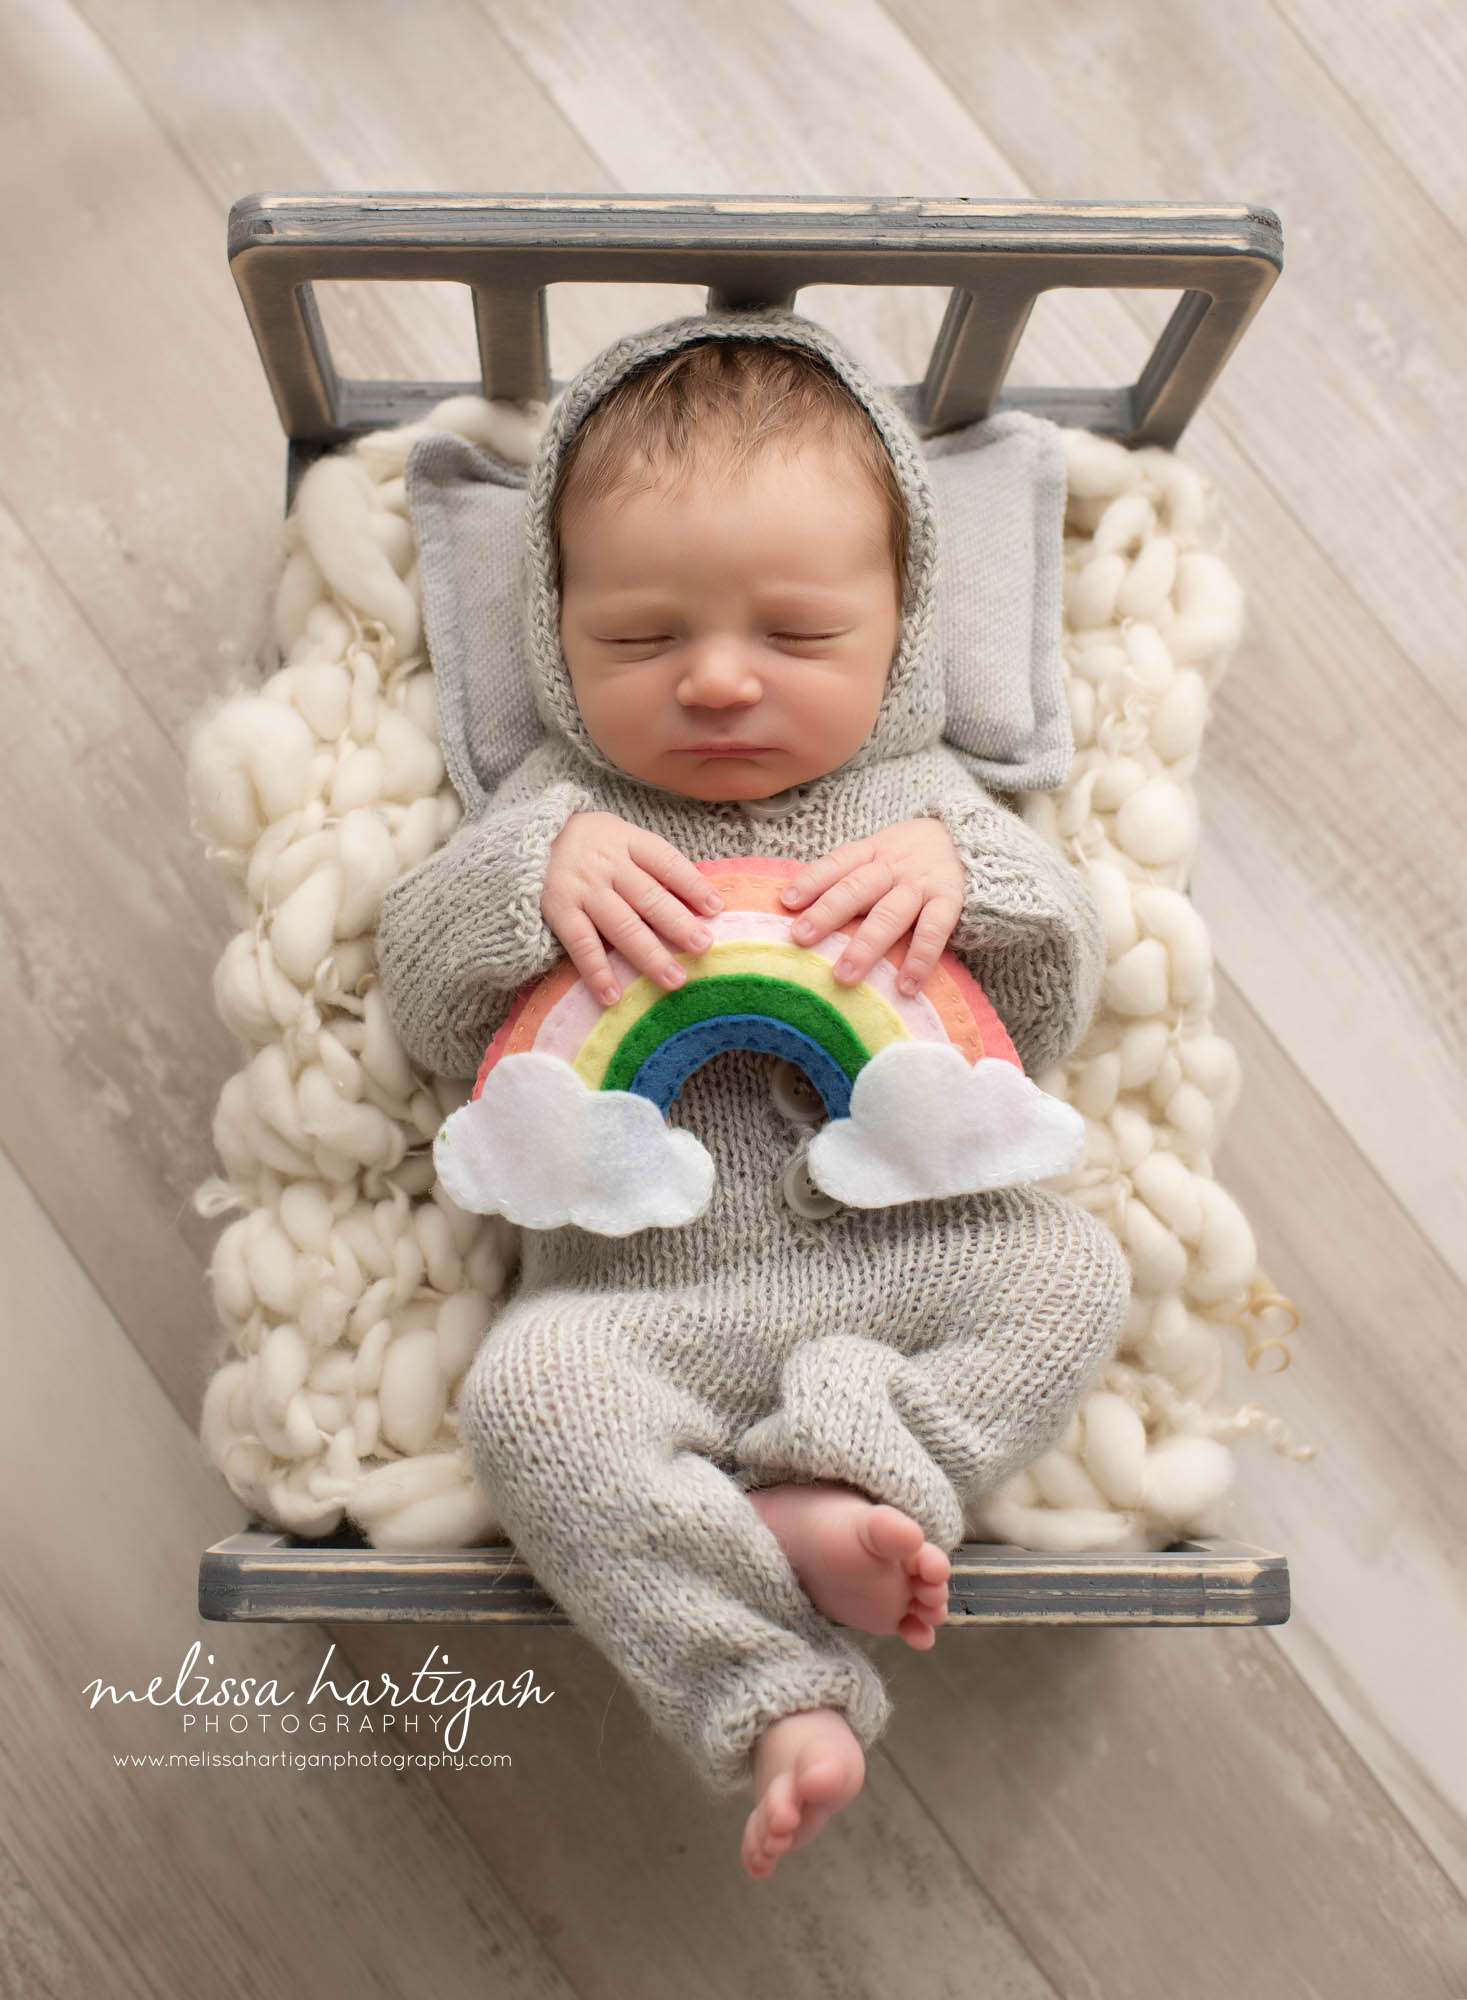 Newborn baby boy posed on wooden bed laying on back wearing grey outfit holding rainbow prop